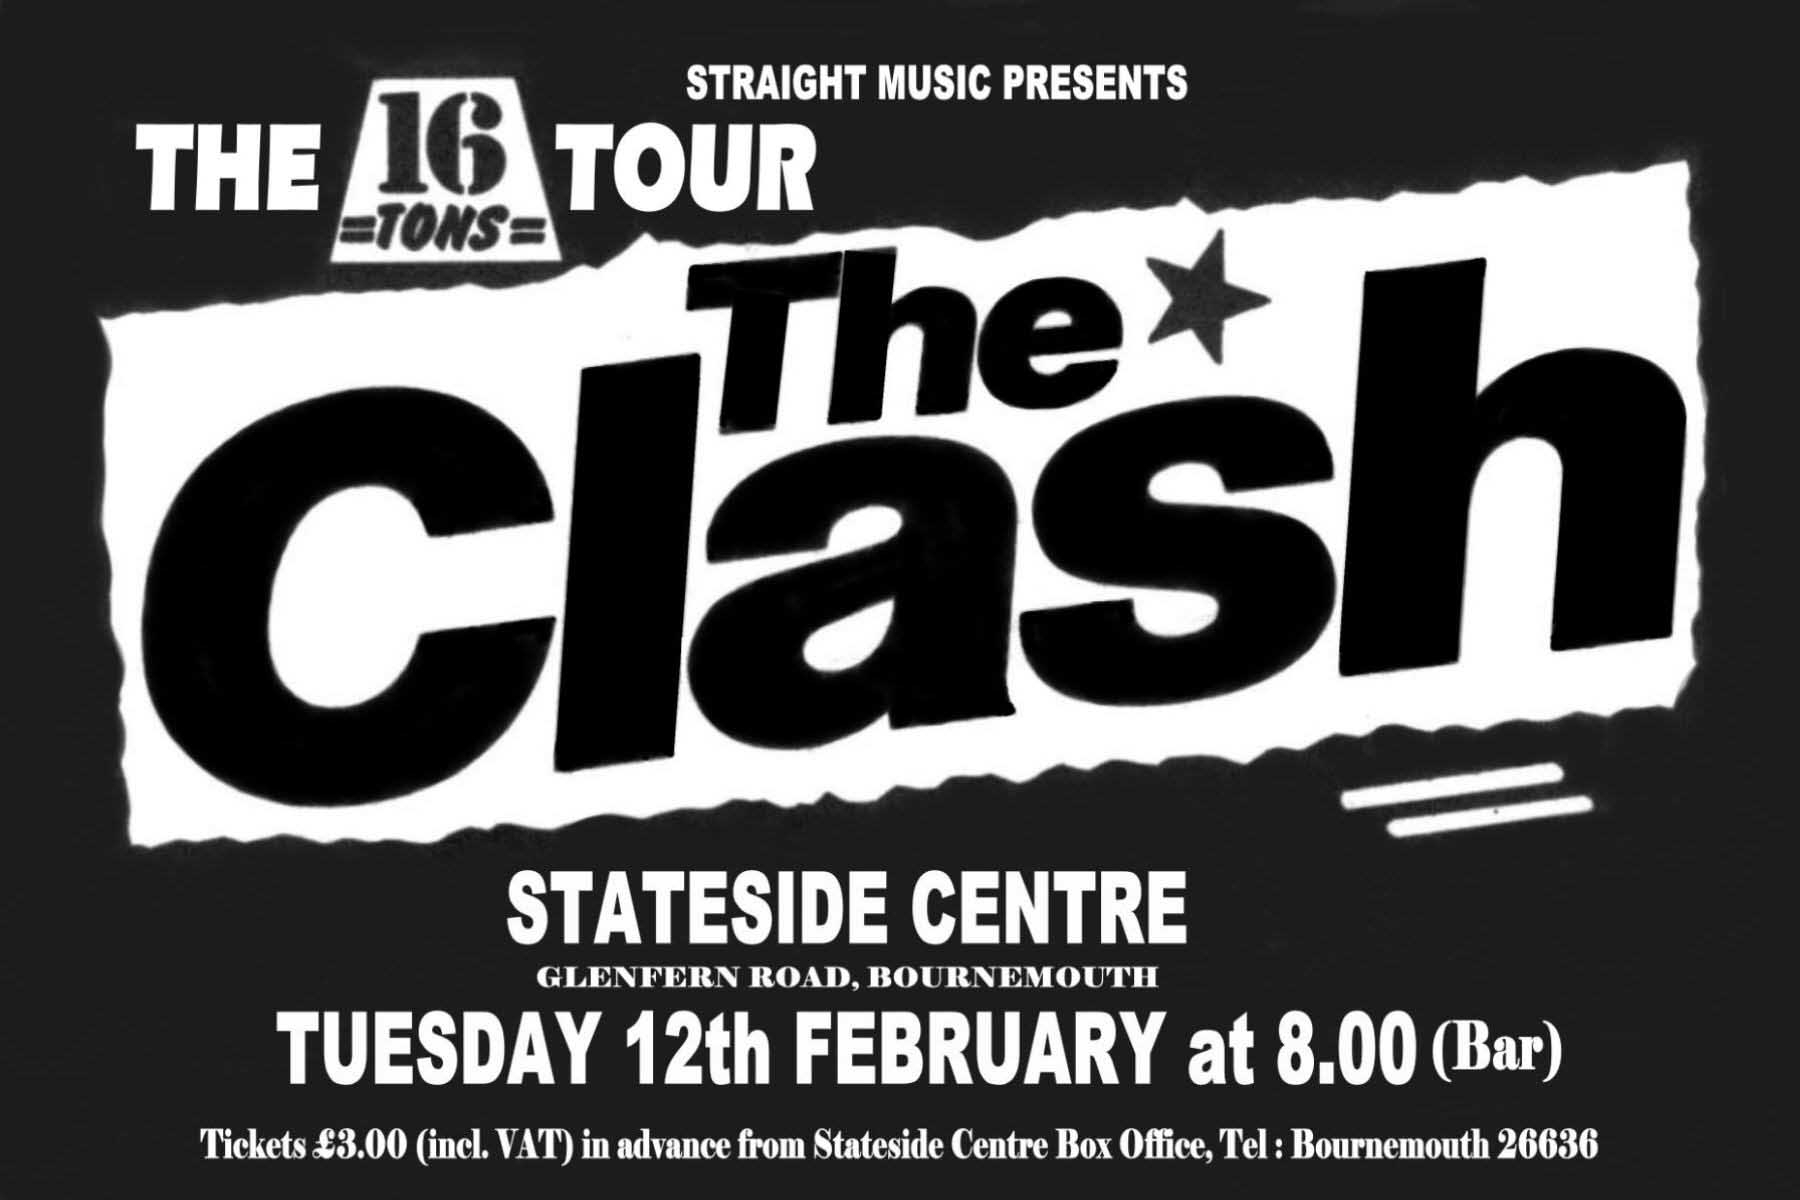 Rock of ages - clash - 12th february Email from mailto:daverobinson5@hotmail.com